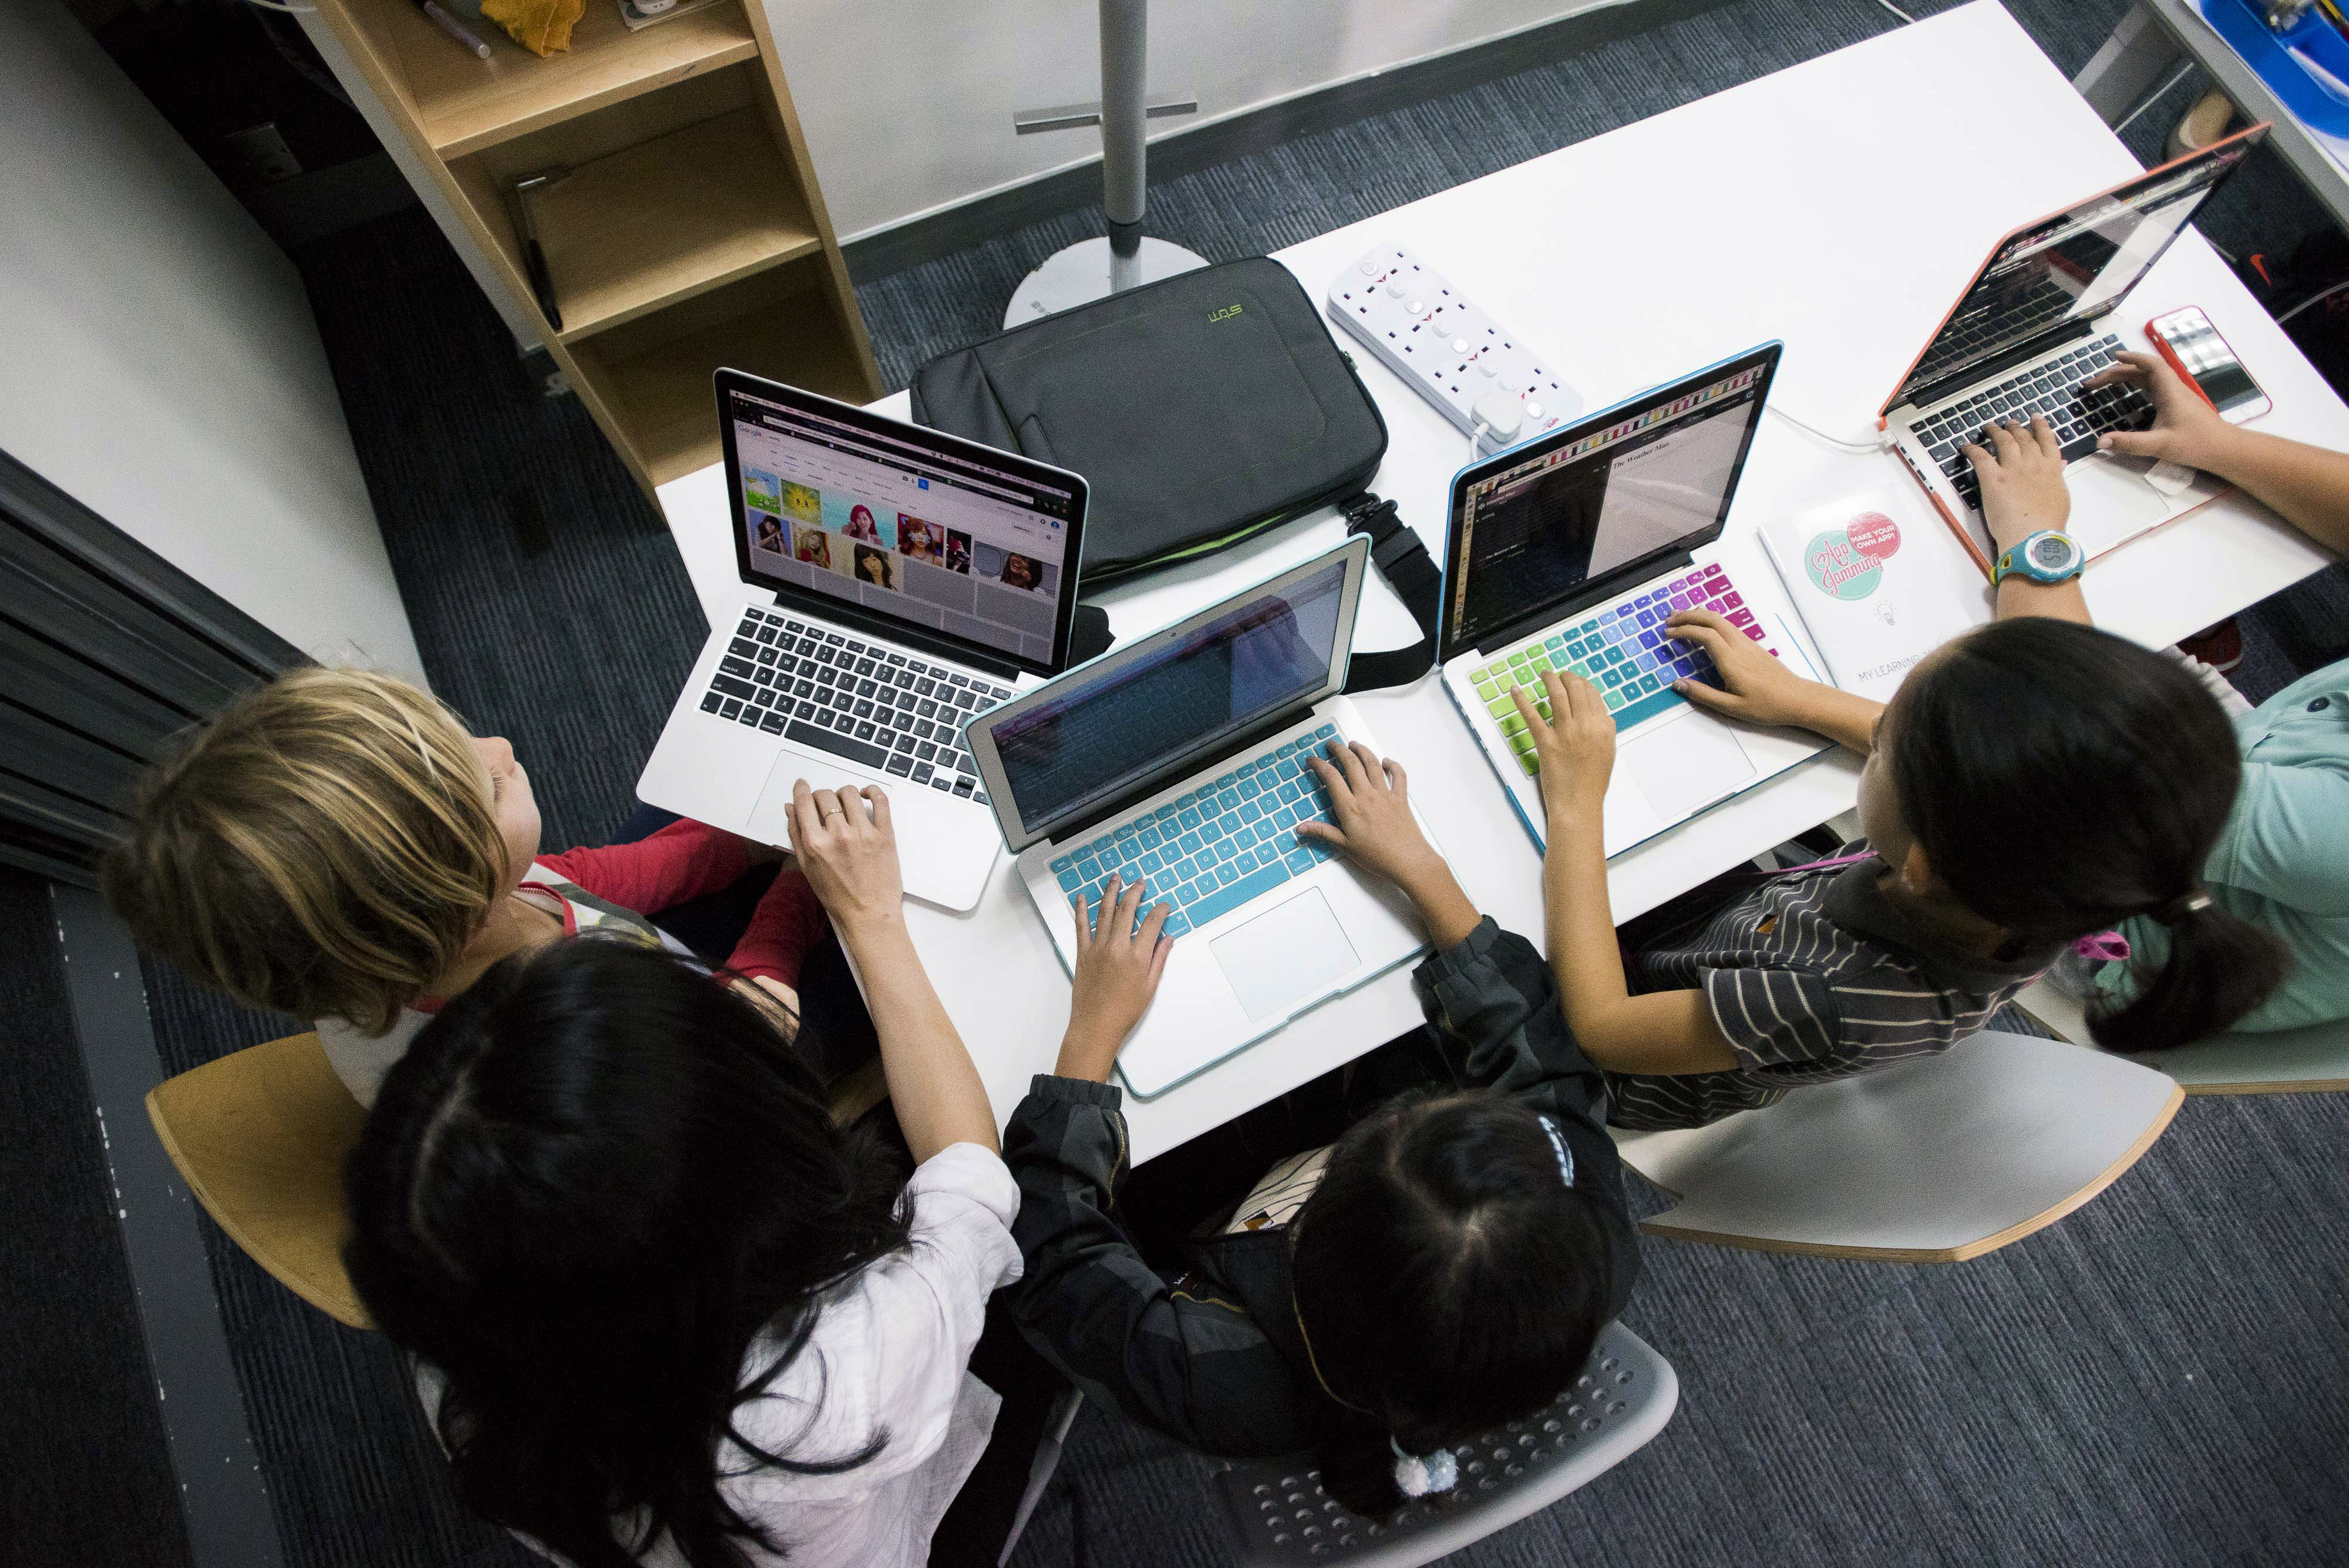 Students type on Apple Inc. laptop computers during a coding class at the First Code Academy in Hong Kong, China, on Friday, Nov. 13, 2015. (Bloomberg&mdash;Bloomberg via Getty Images)